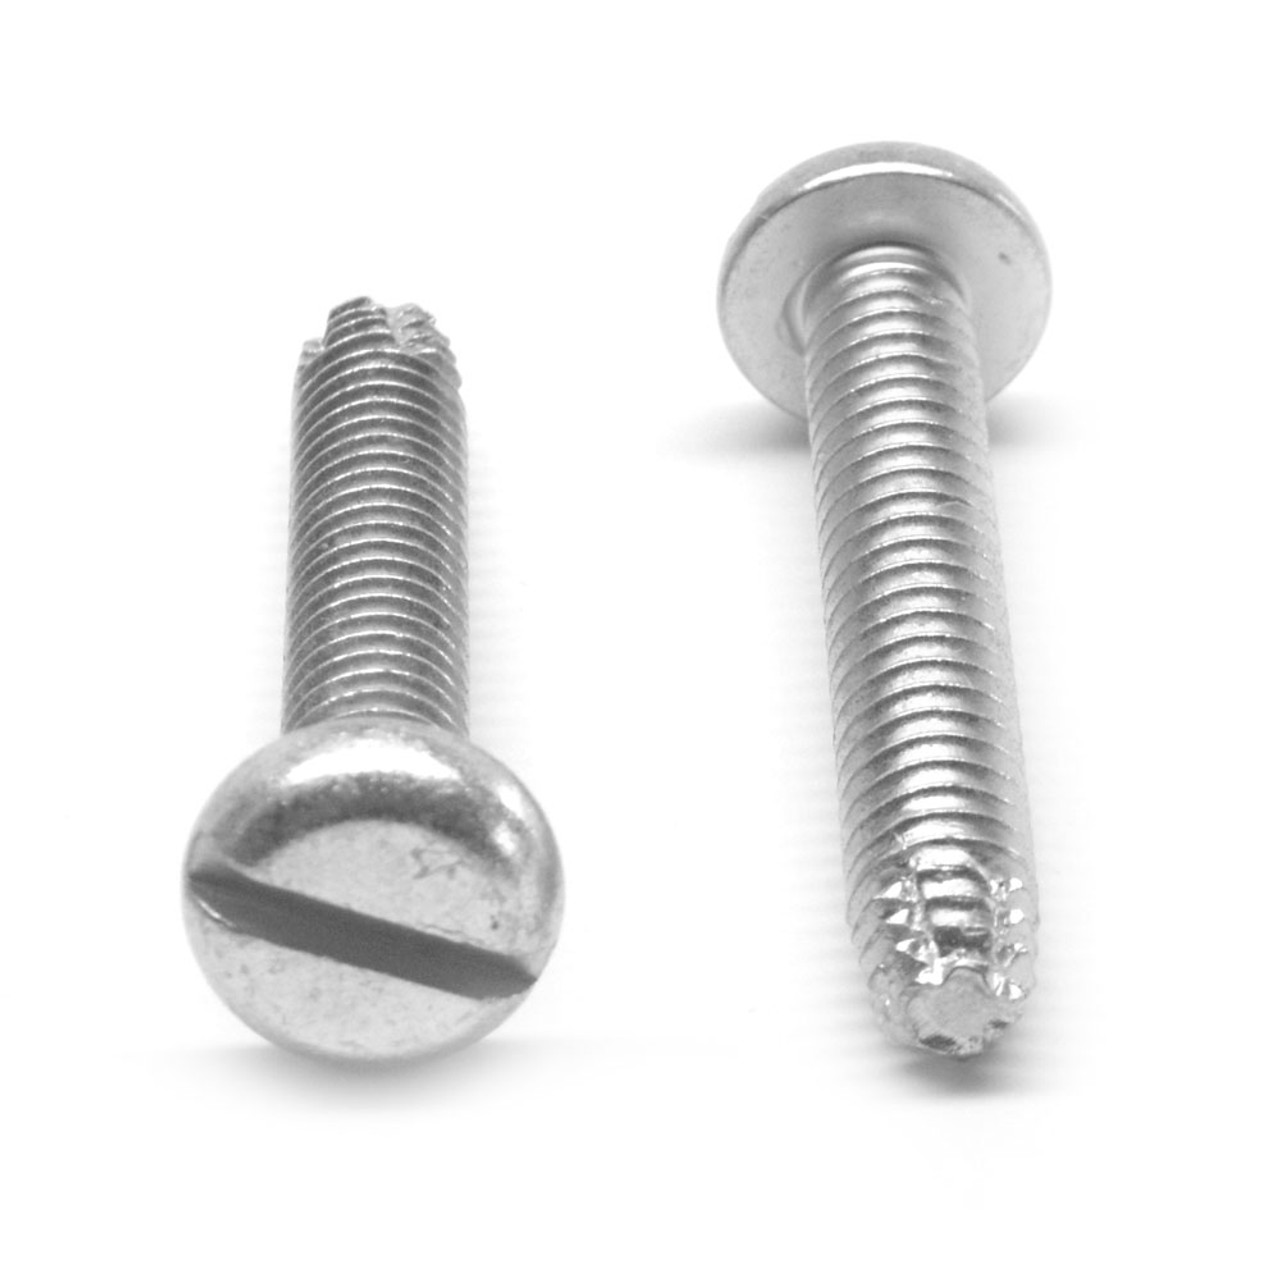 1/4-20 x 3 Coarse Thread Thread Cutting Screw Slotted Pan Head Type F Low Carbon Steel Zinc Plated